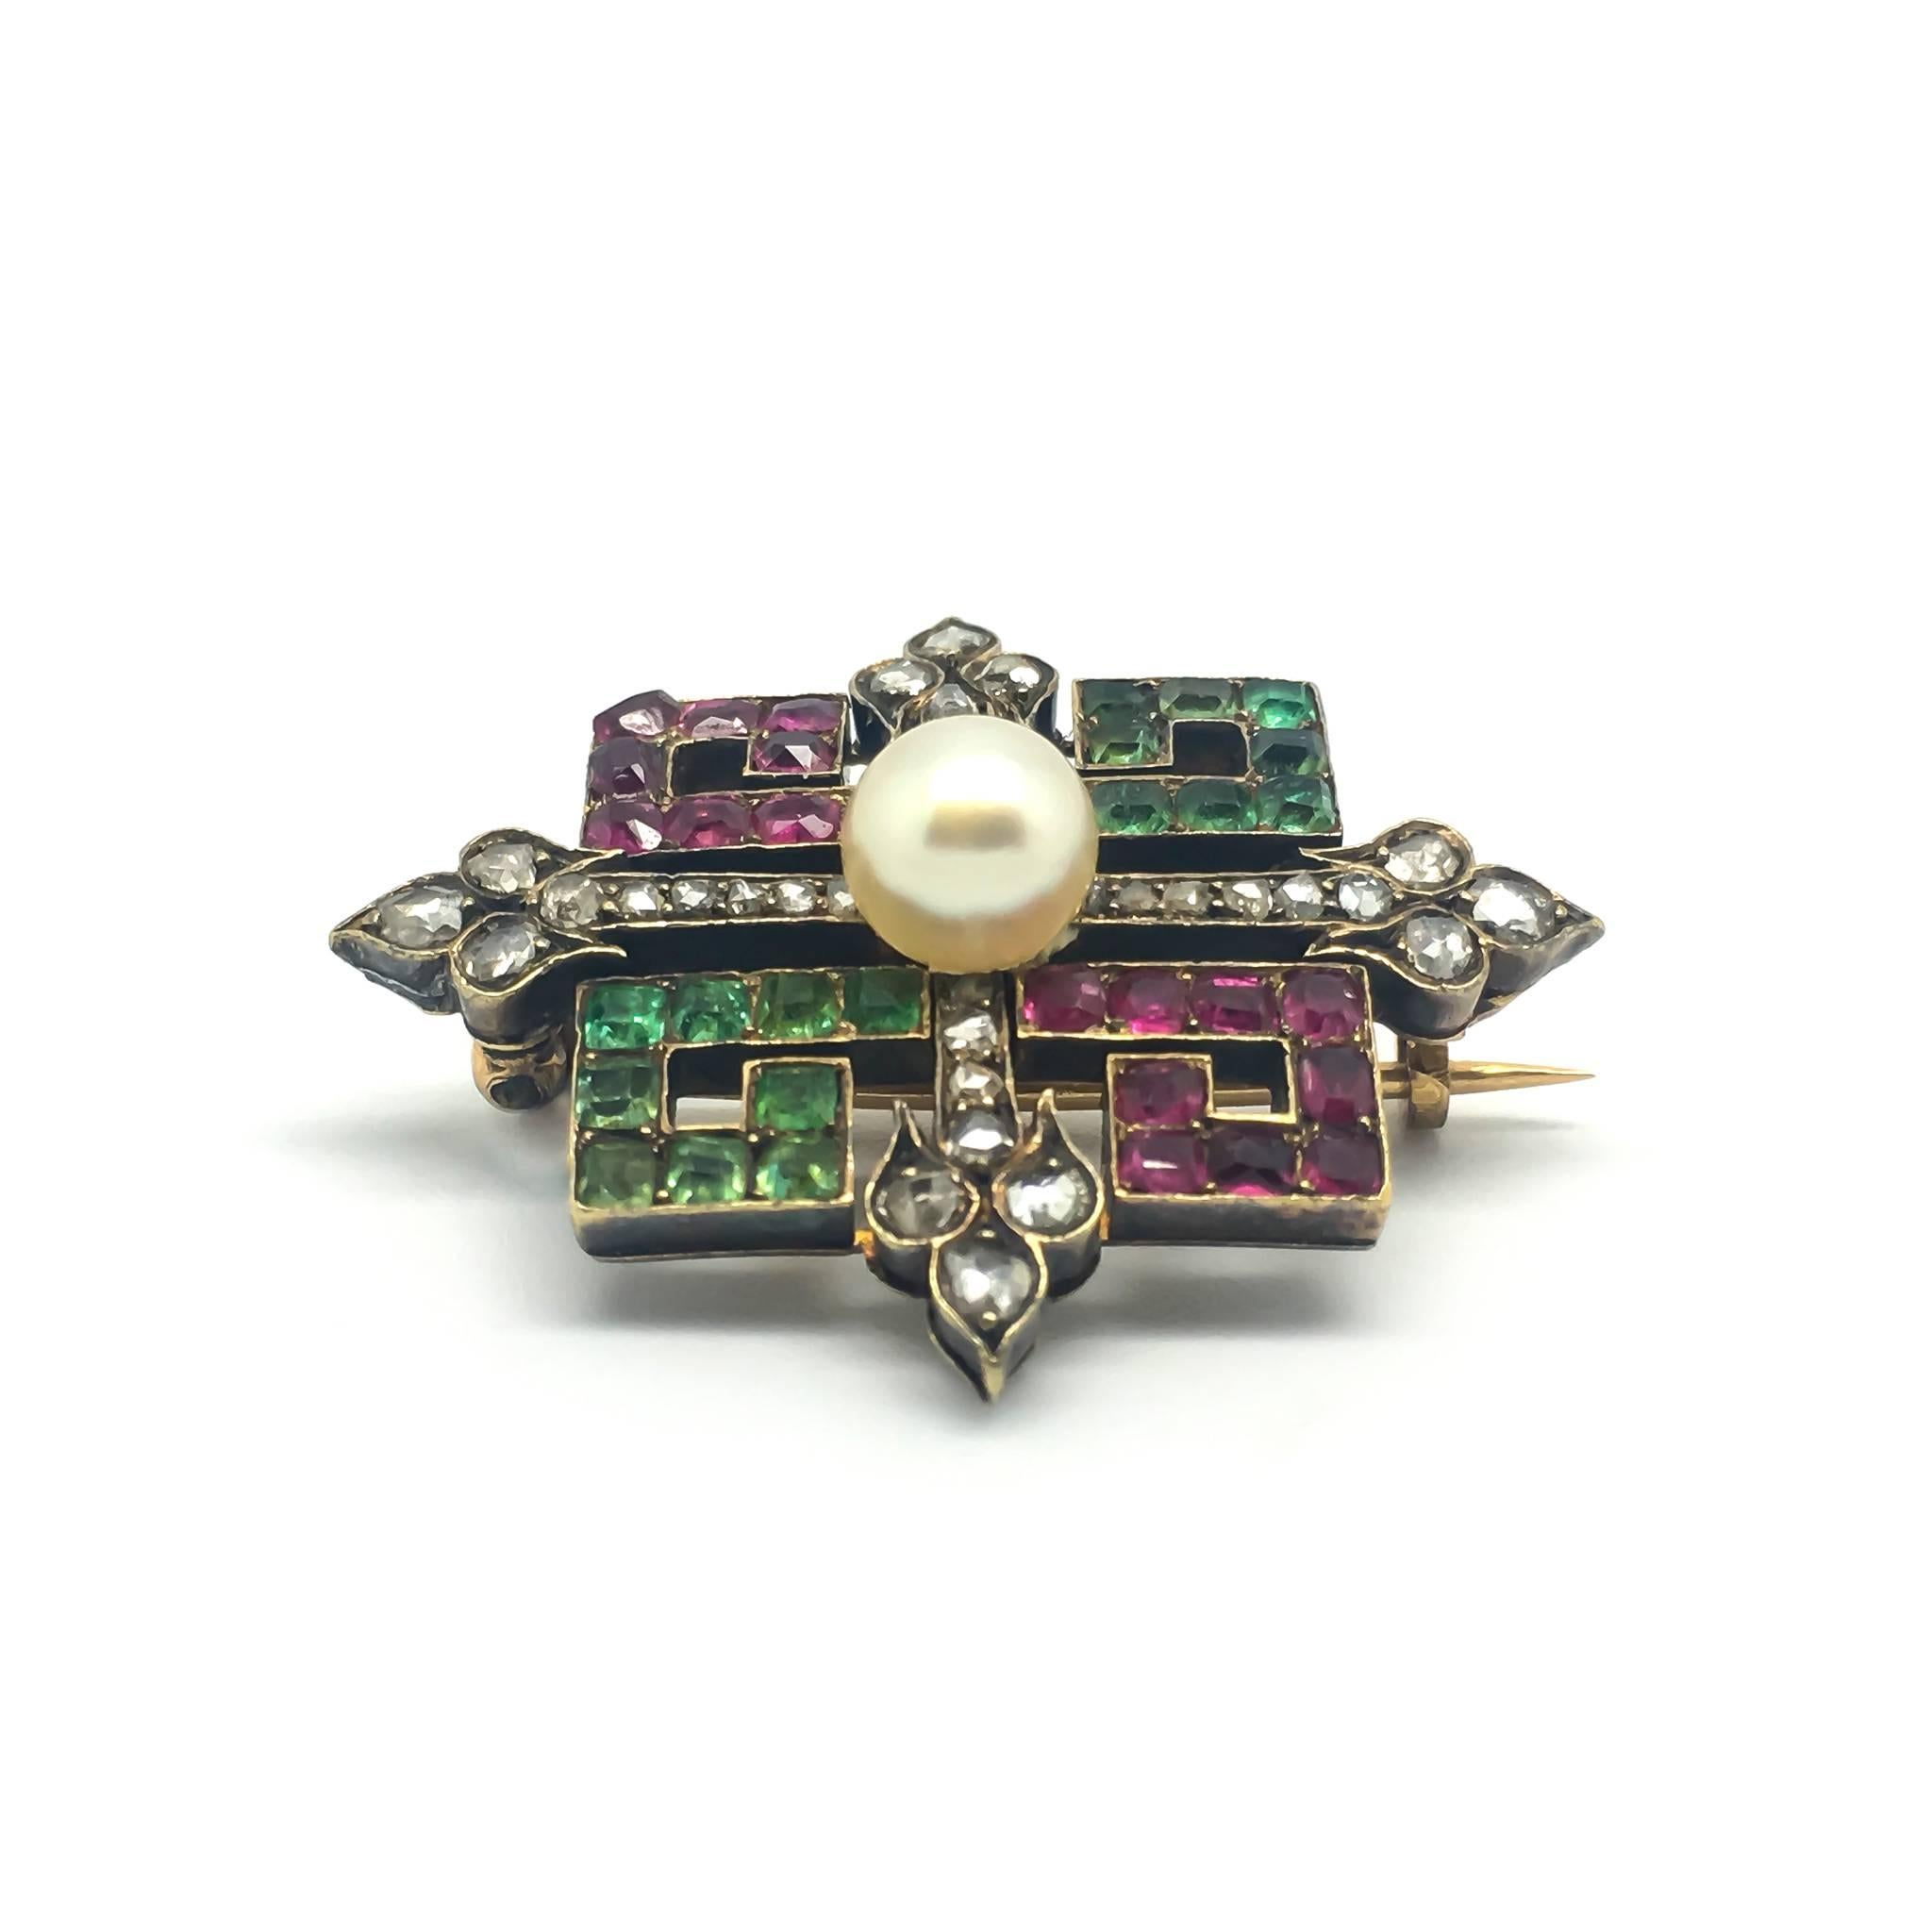 A fine Victorian Brooch set with emeralds, diamonds, sapphires and a central pearl.

The brooch contains a cross motif with geometric shapes around it. The calibre set stones are vibrant and well matched throughout. 

The brooch fitting is on a